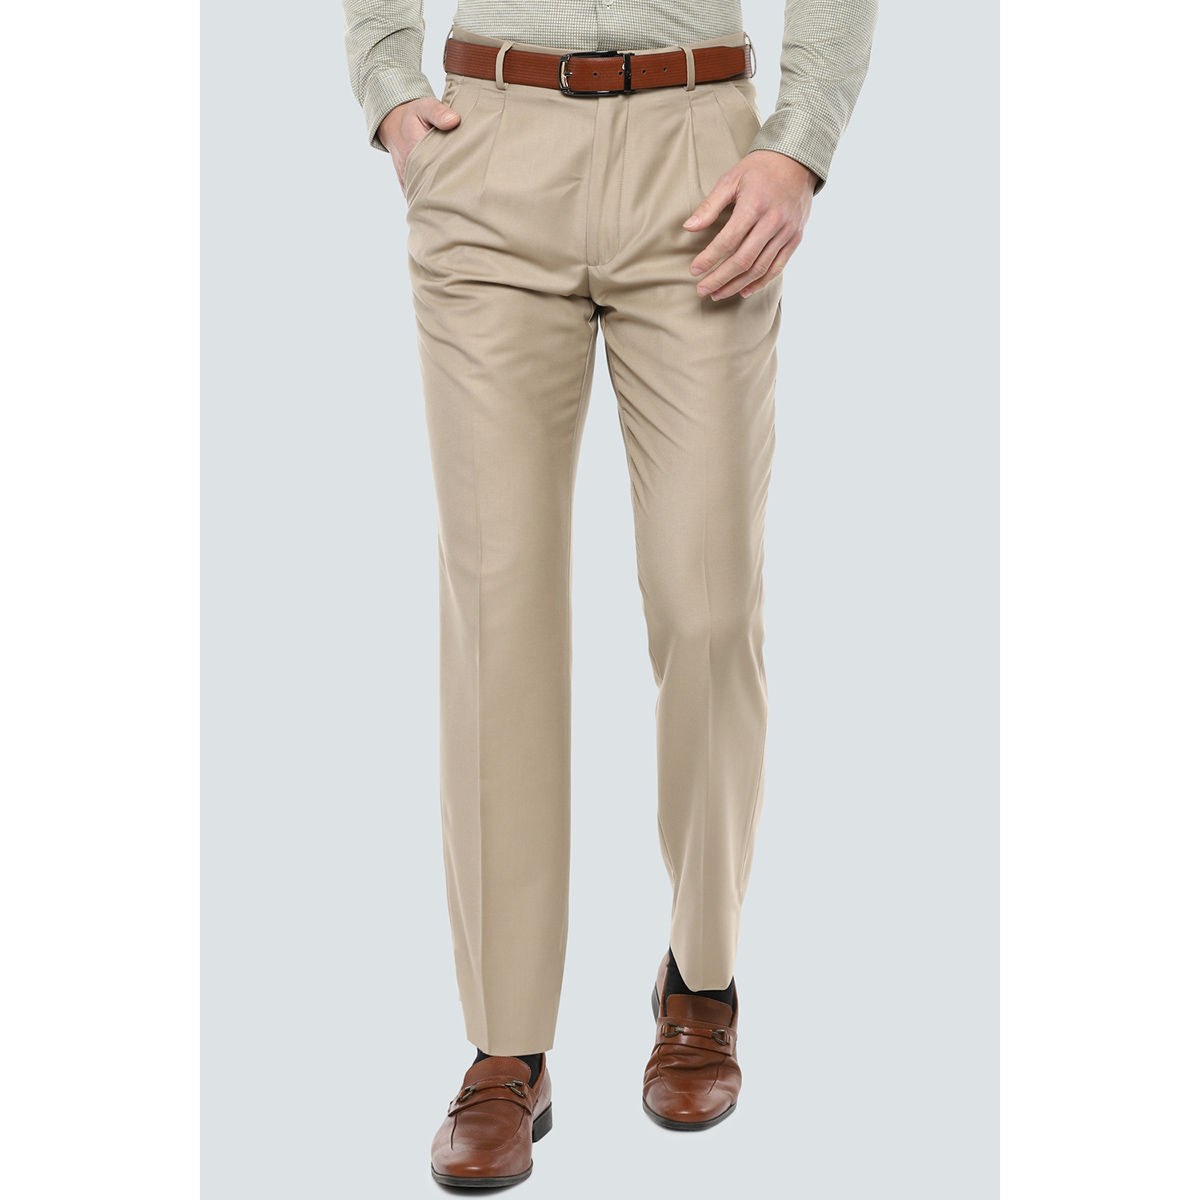 Louis Philippe Formal Trousers  Buy Louis Philippe Men Beige Regular Fit  Textured Flat Front Formal Trousers Online  Nykaa Fashion